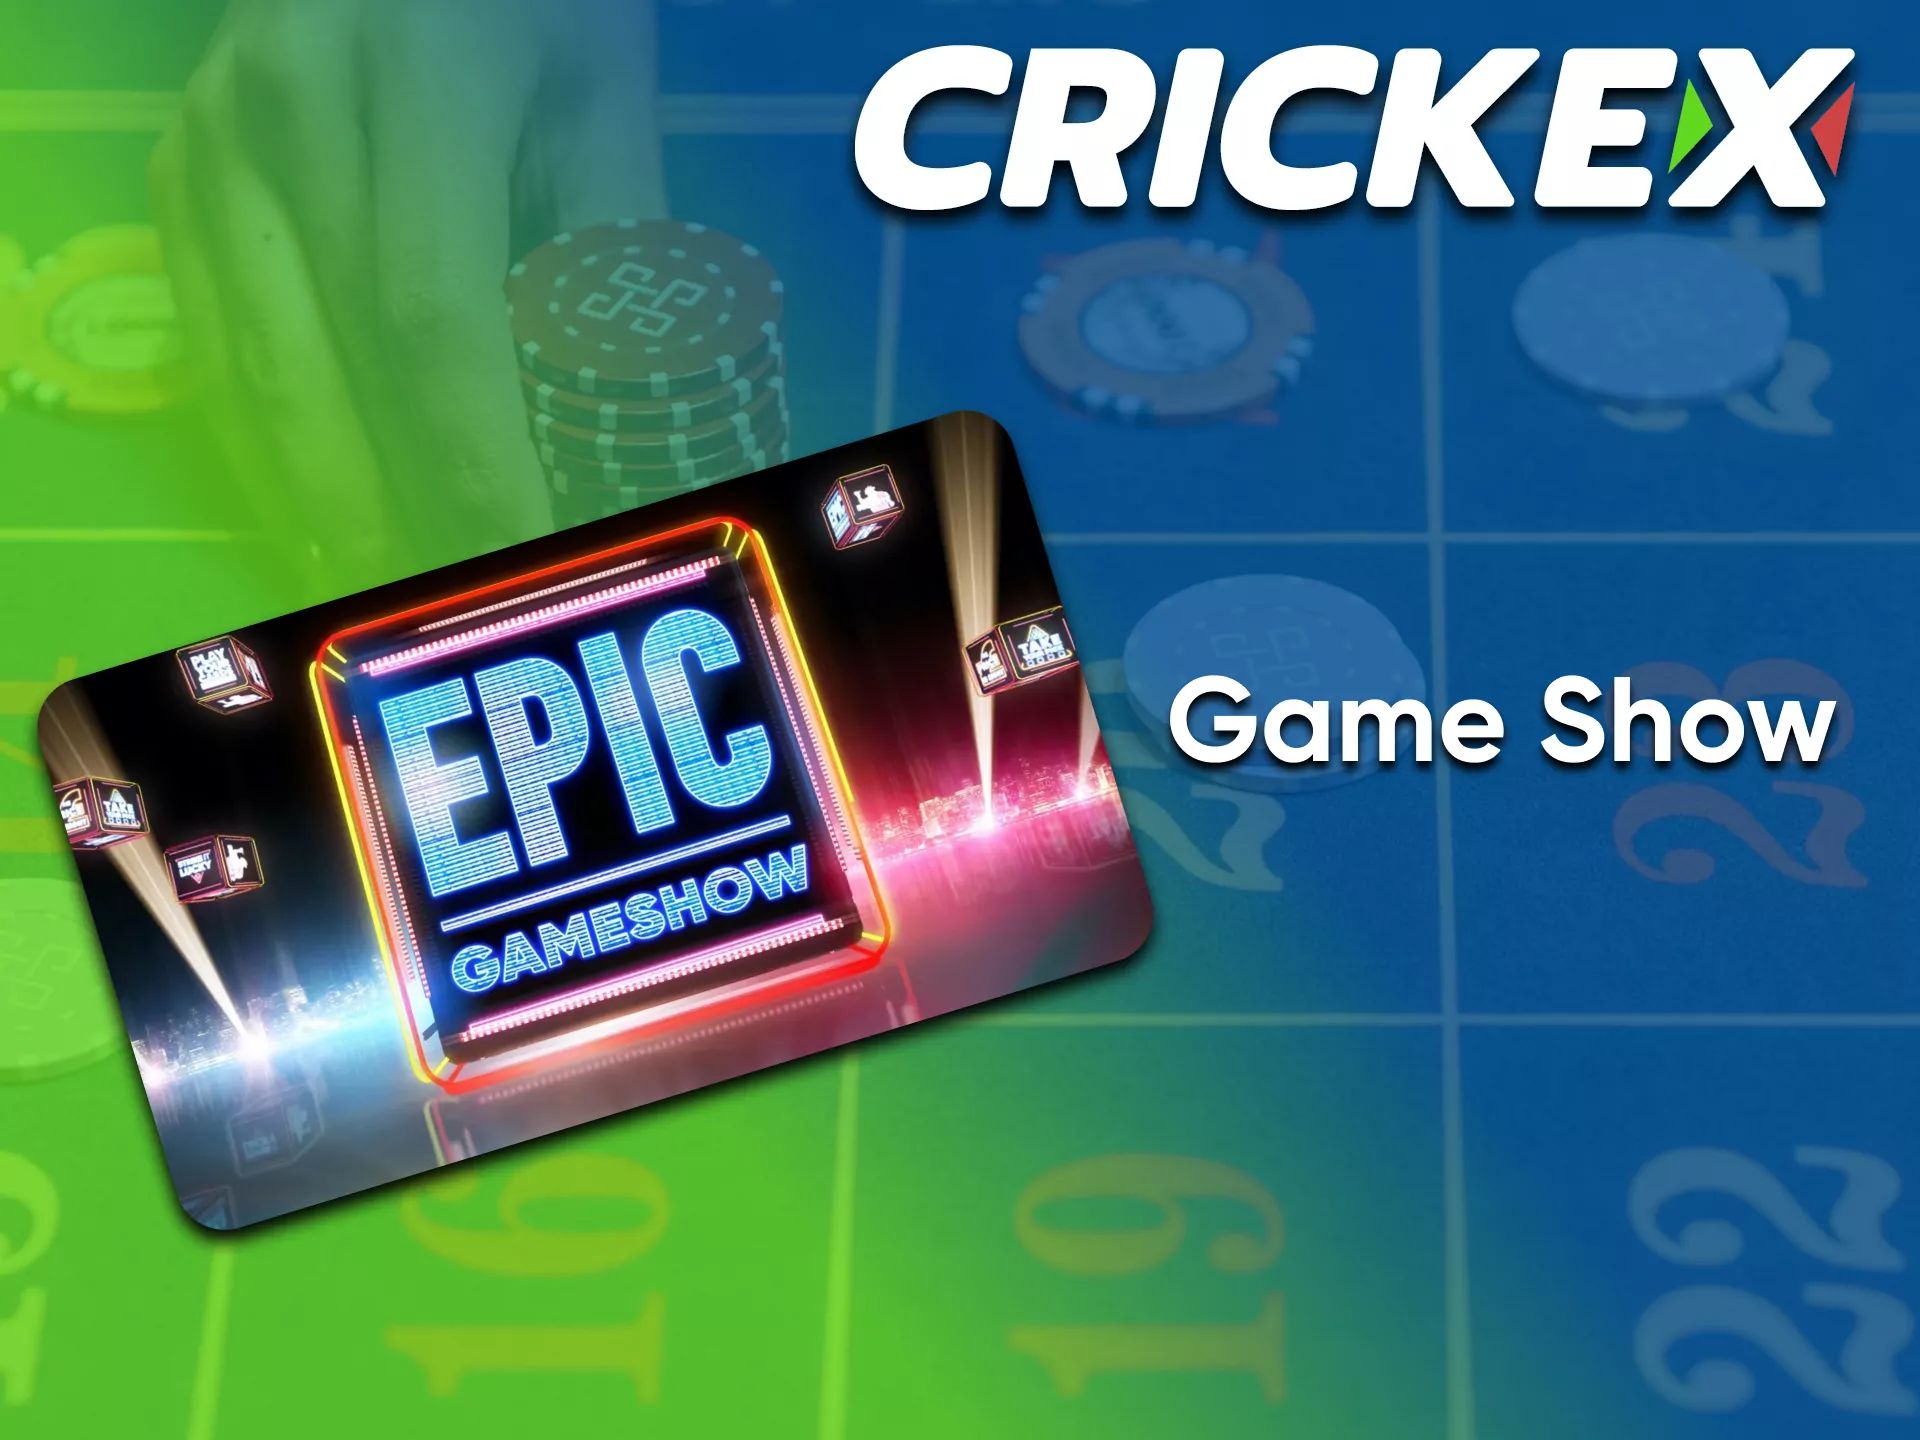 Visit the Crickex casino to play Games Shows.